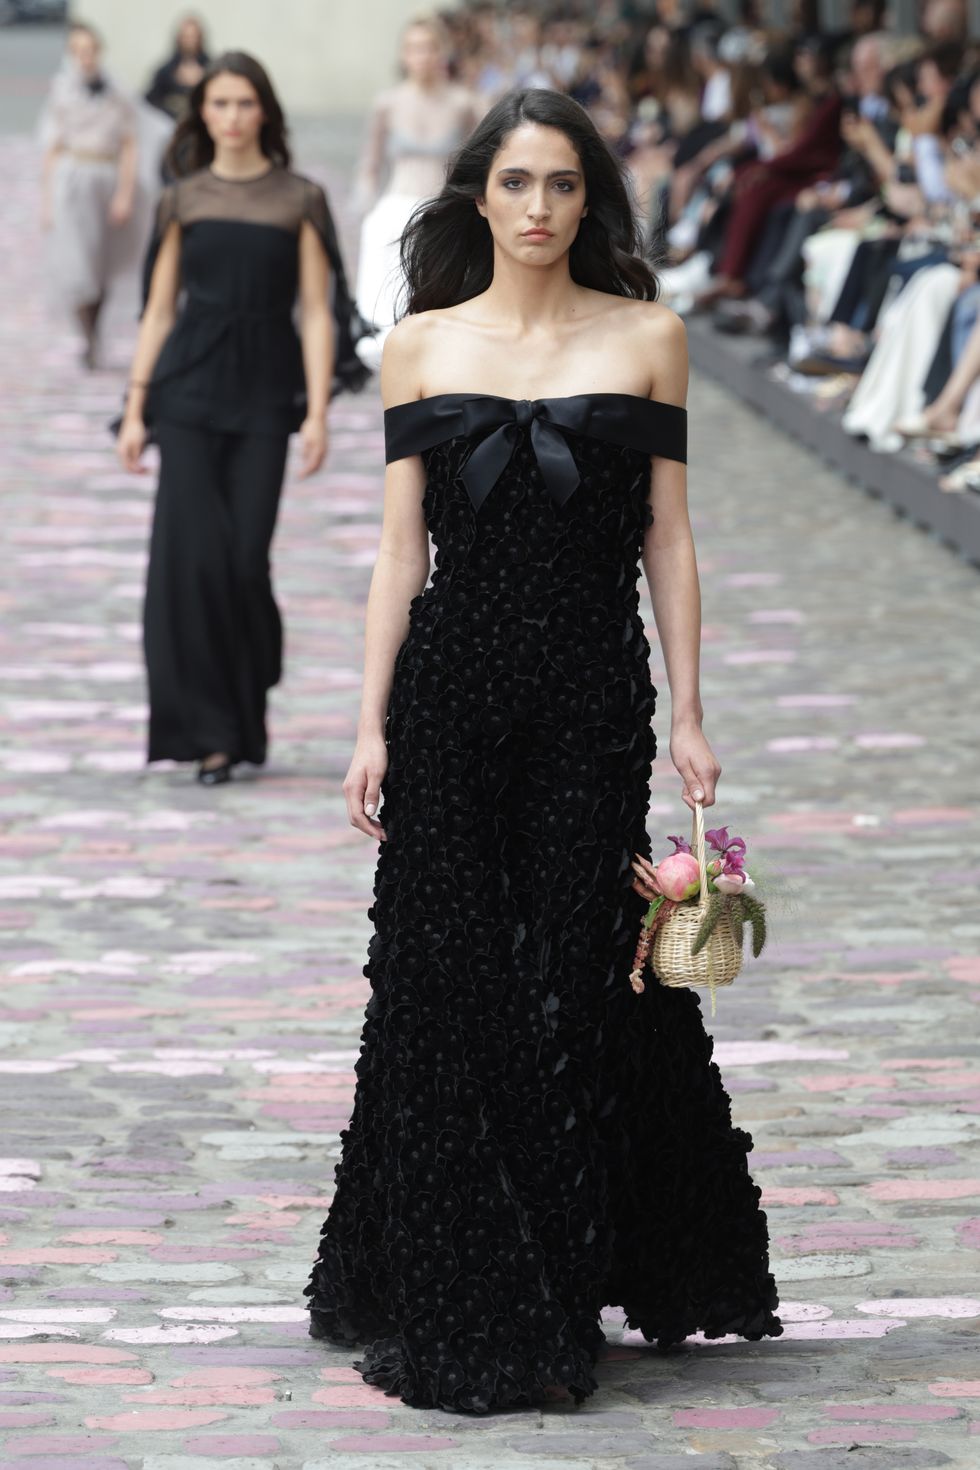 House of Chanel, Evening ensemble, French